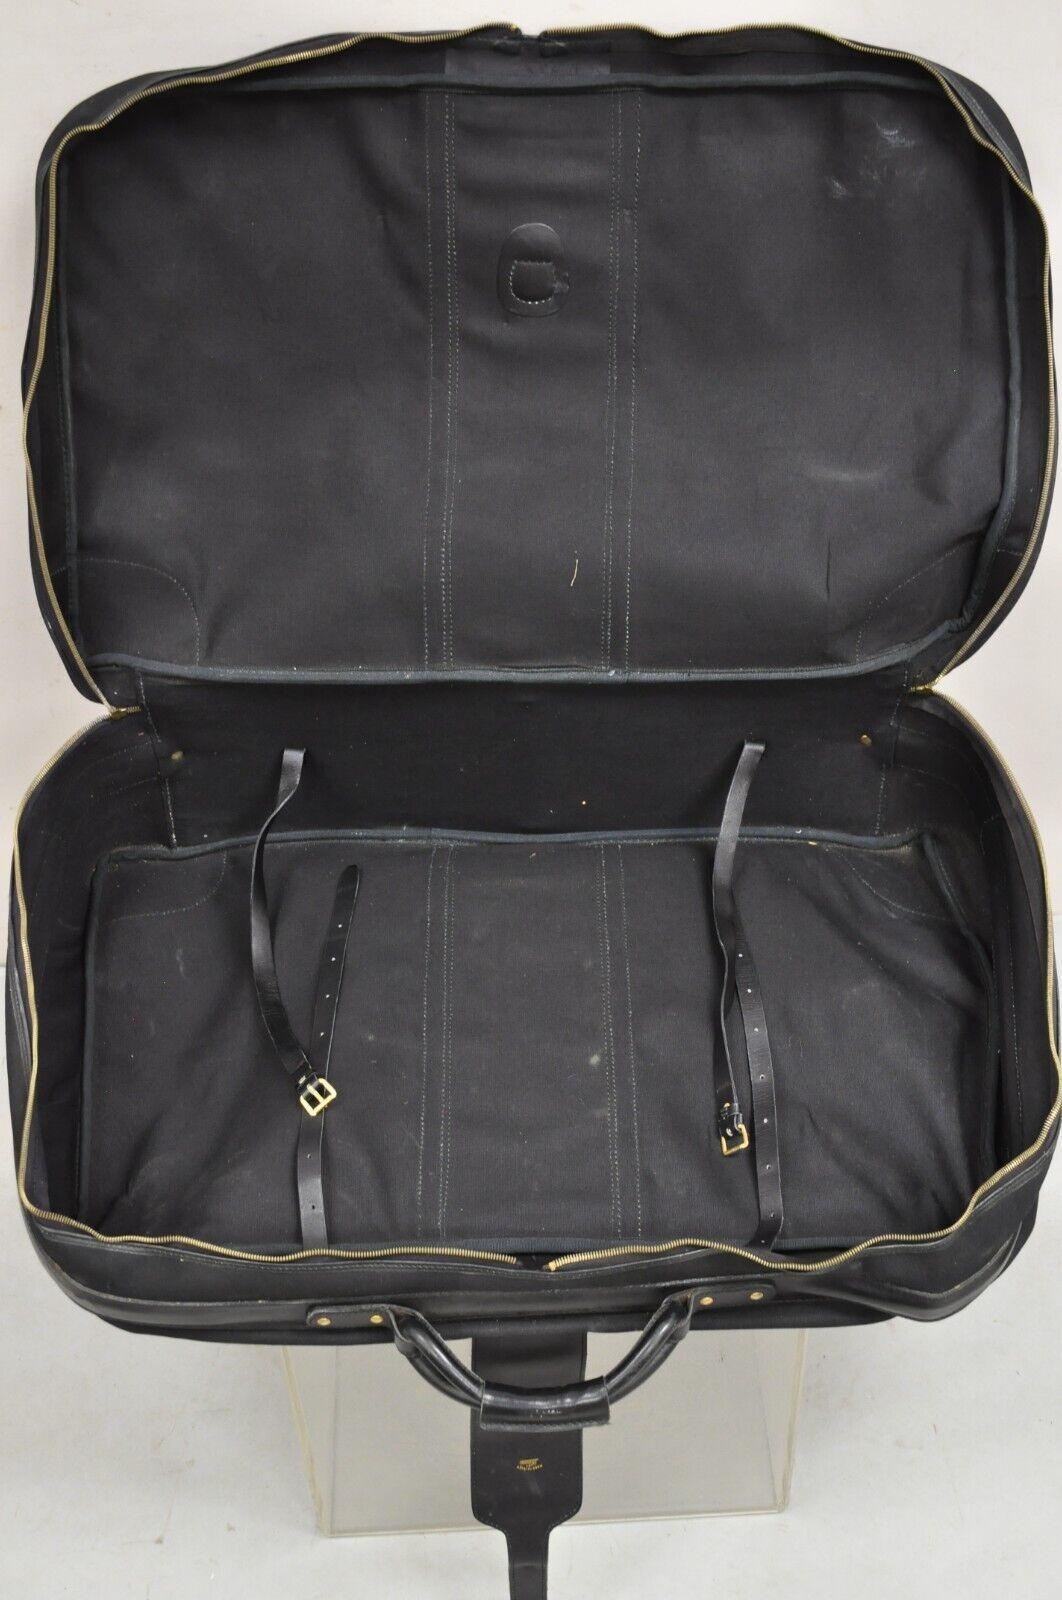 Vintage Gucci Black Canvas and Leather Suitcase Luggage His and Hers Set - 2 Pcs For Sale 4